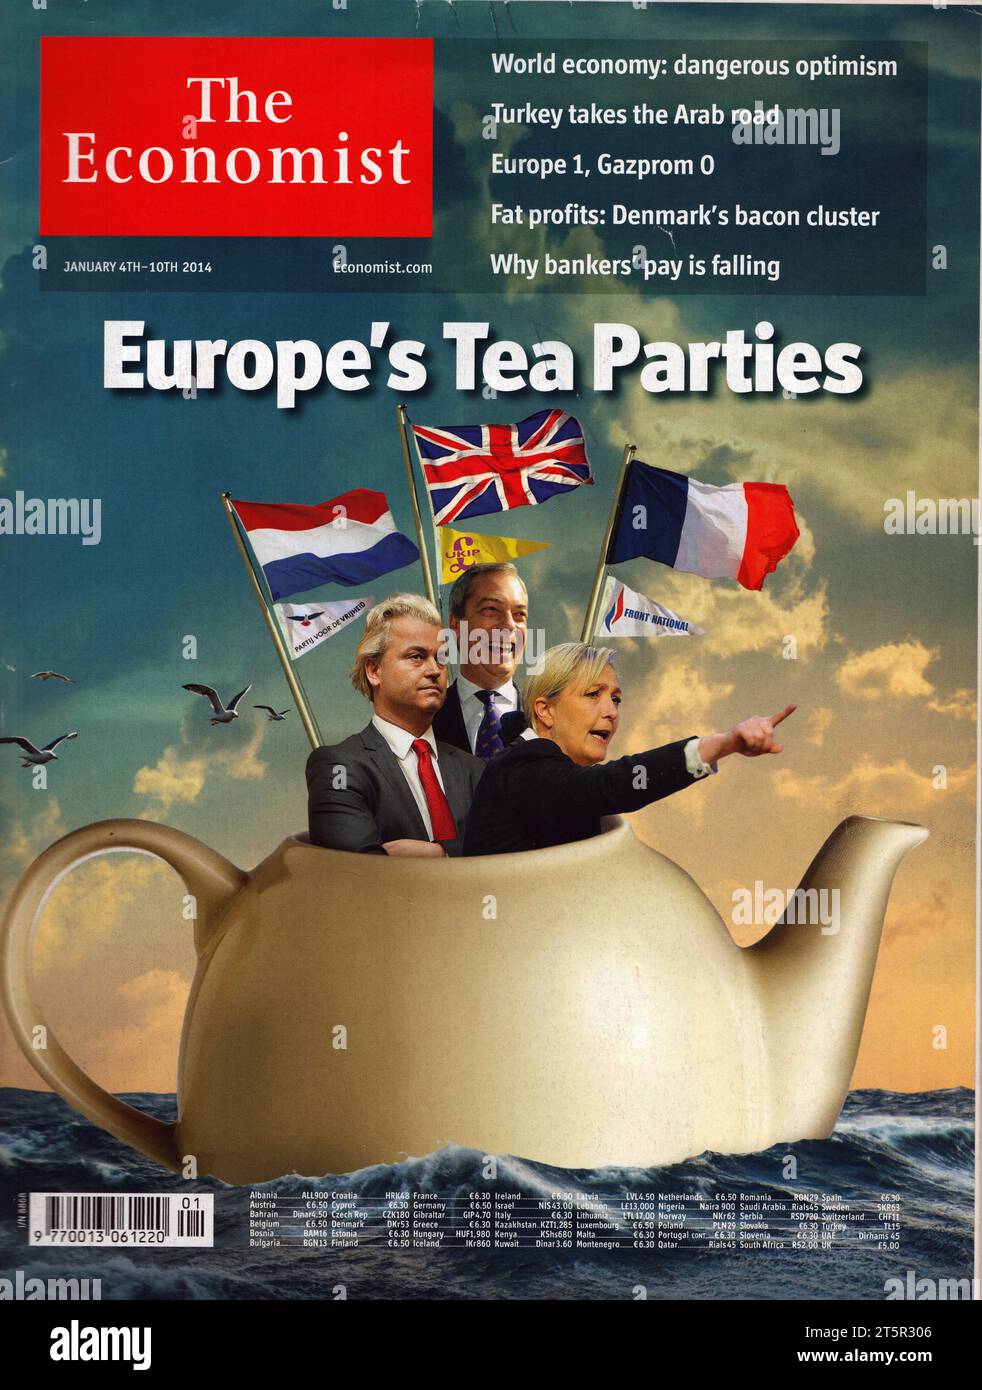 Cover page of The Economist magazine January 14, 2014 Stock Photo